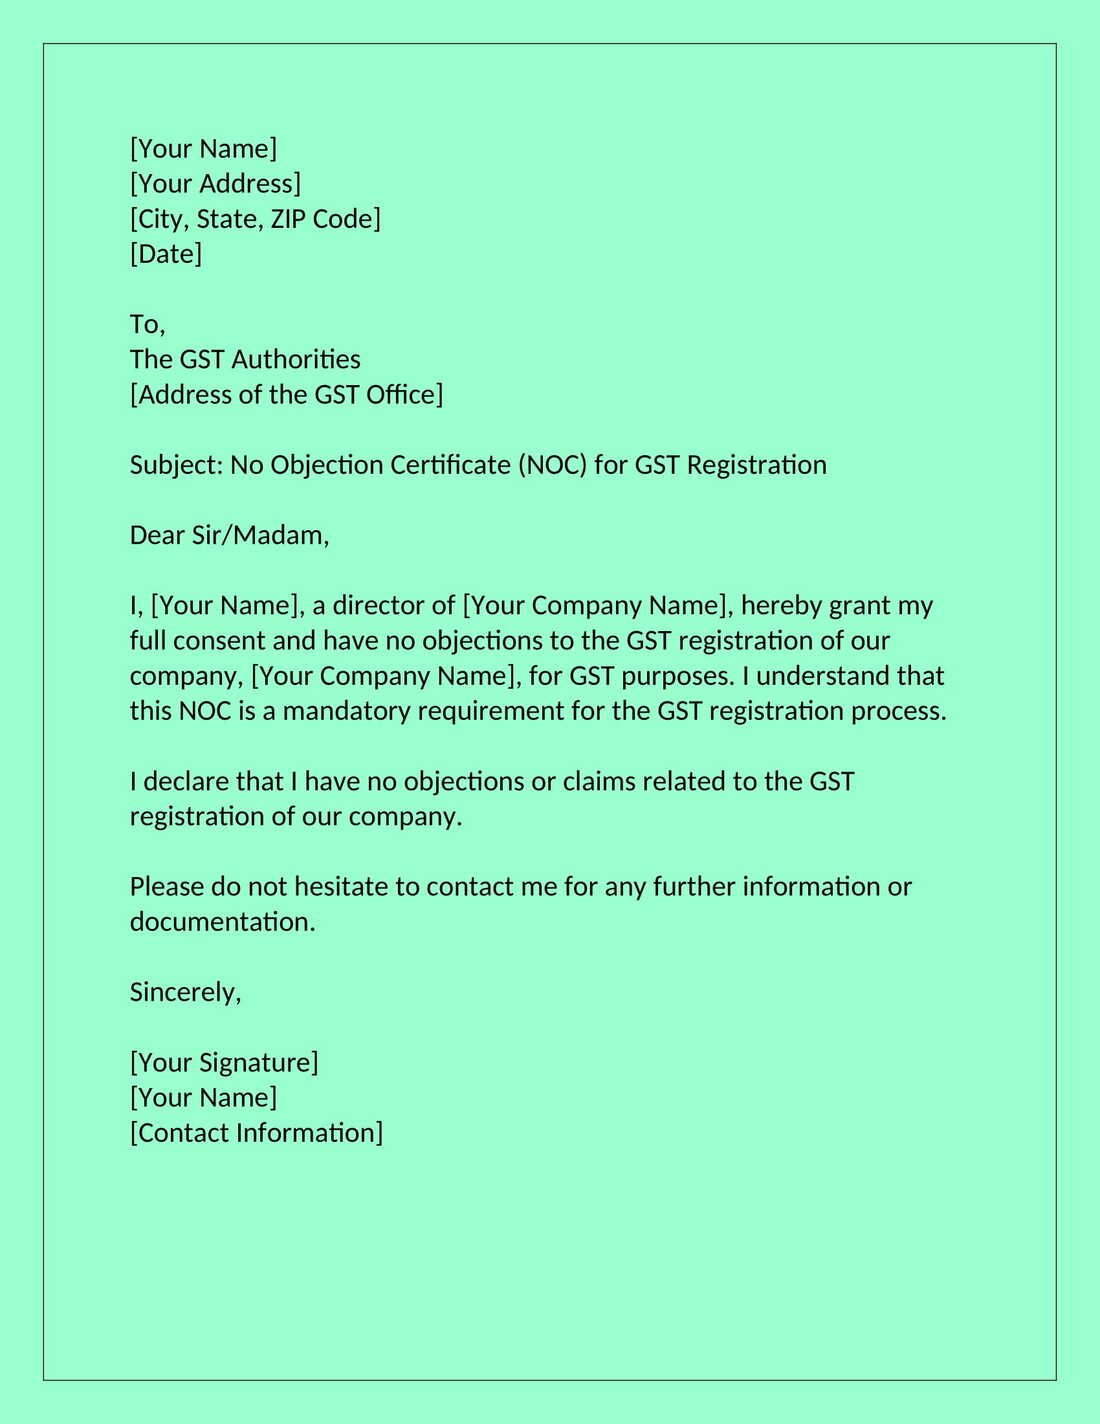 NOC Letter from Director for GST Registration (Company)